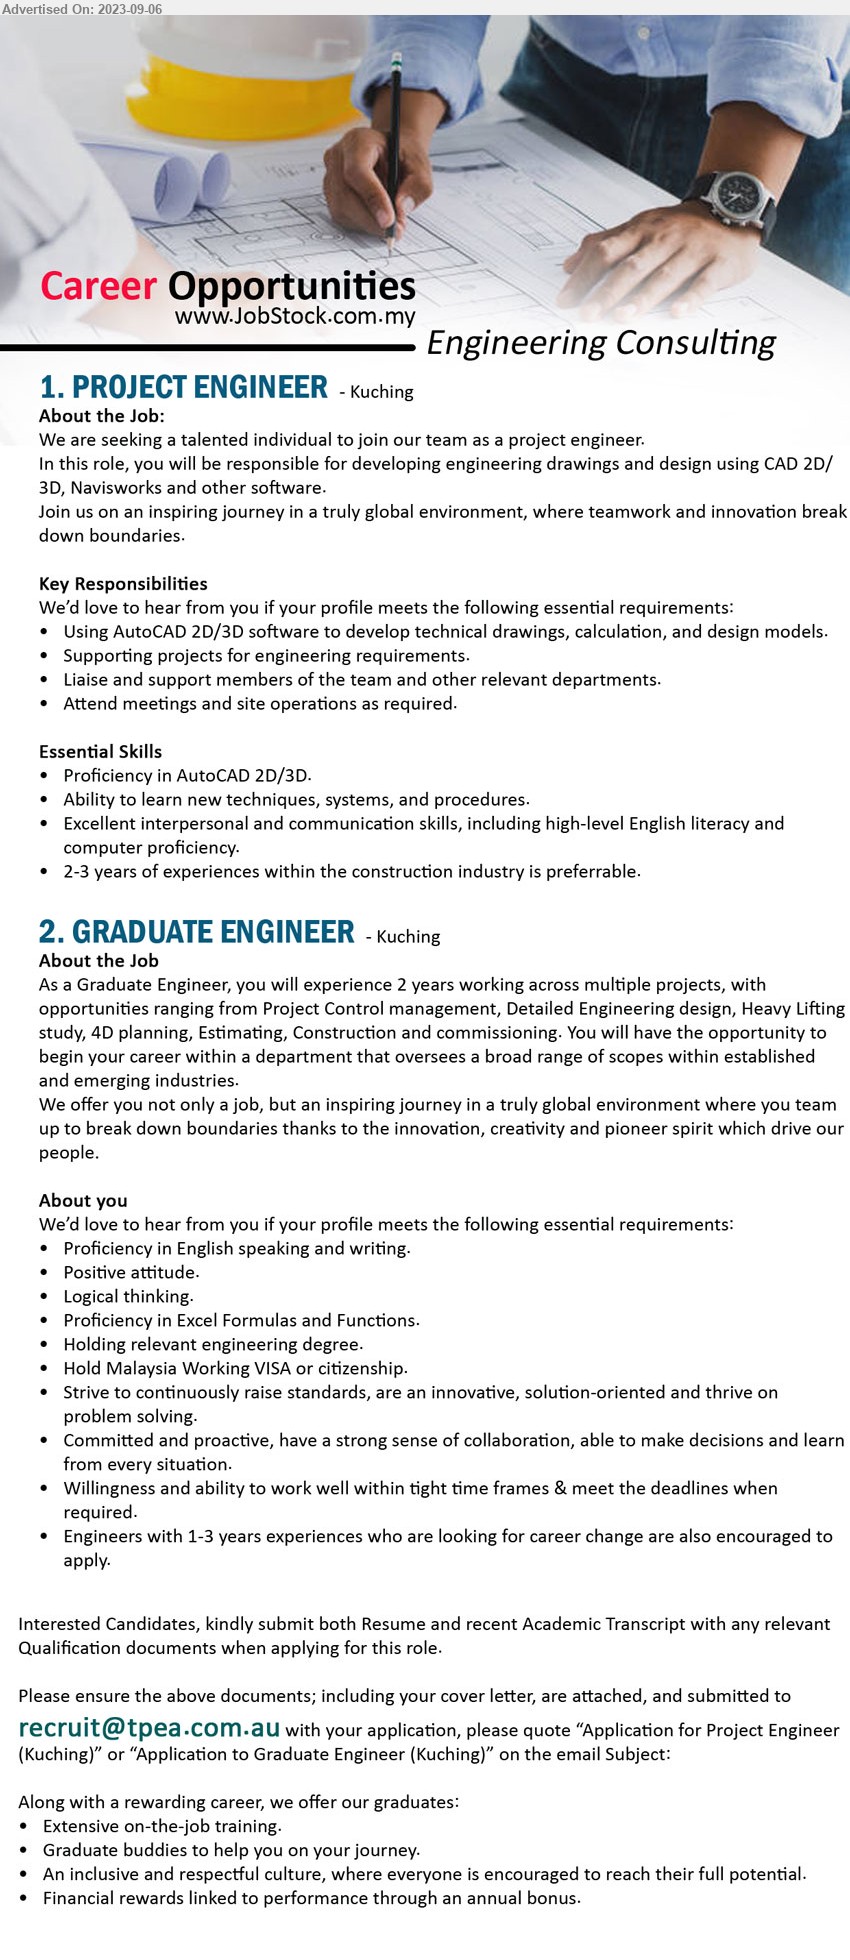 ADVERTISER (Engineering Consulting) - 1. PROJECT ENGINEER (Kuching), Proficiency in AutoCAD 2D/3D,  2-3 years of experiences within the construction industry is preferable.,...
2. GRADUATE ENGINEER (Kuching), Engineers with 1-3 years experiences who are looking for career change are also encouraged to apply.,...
Email resume to ...
